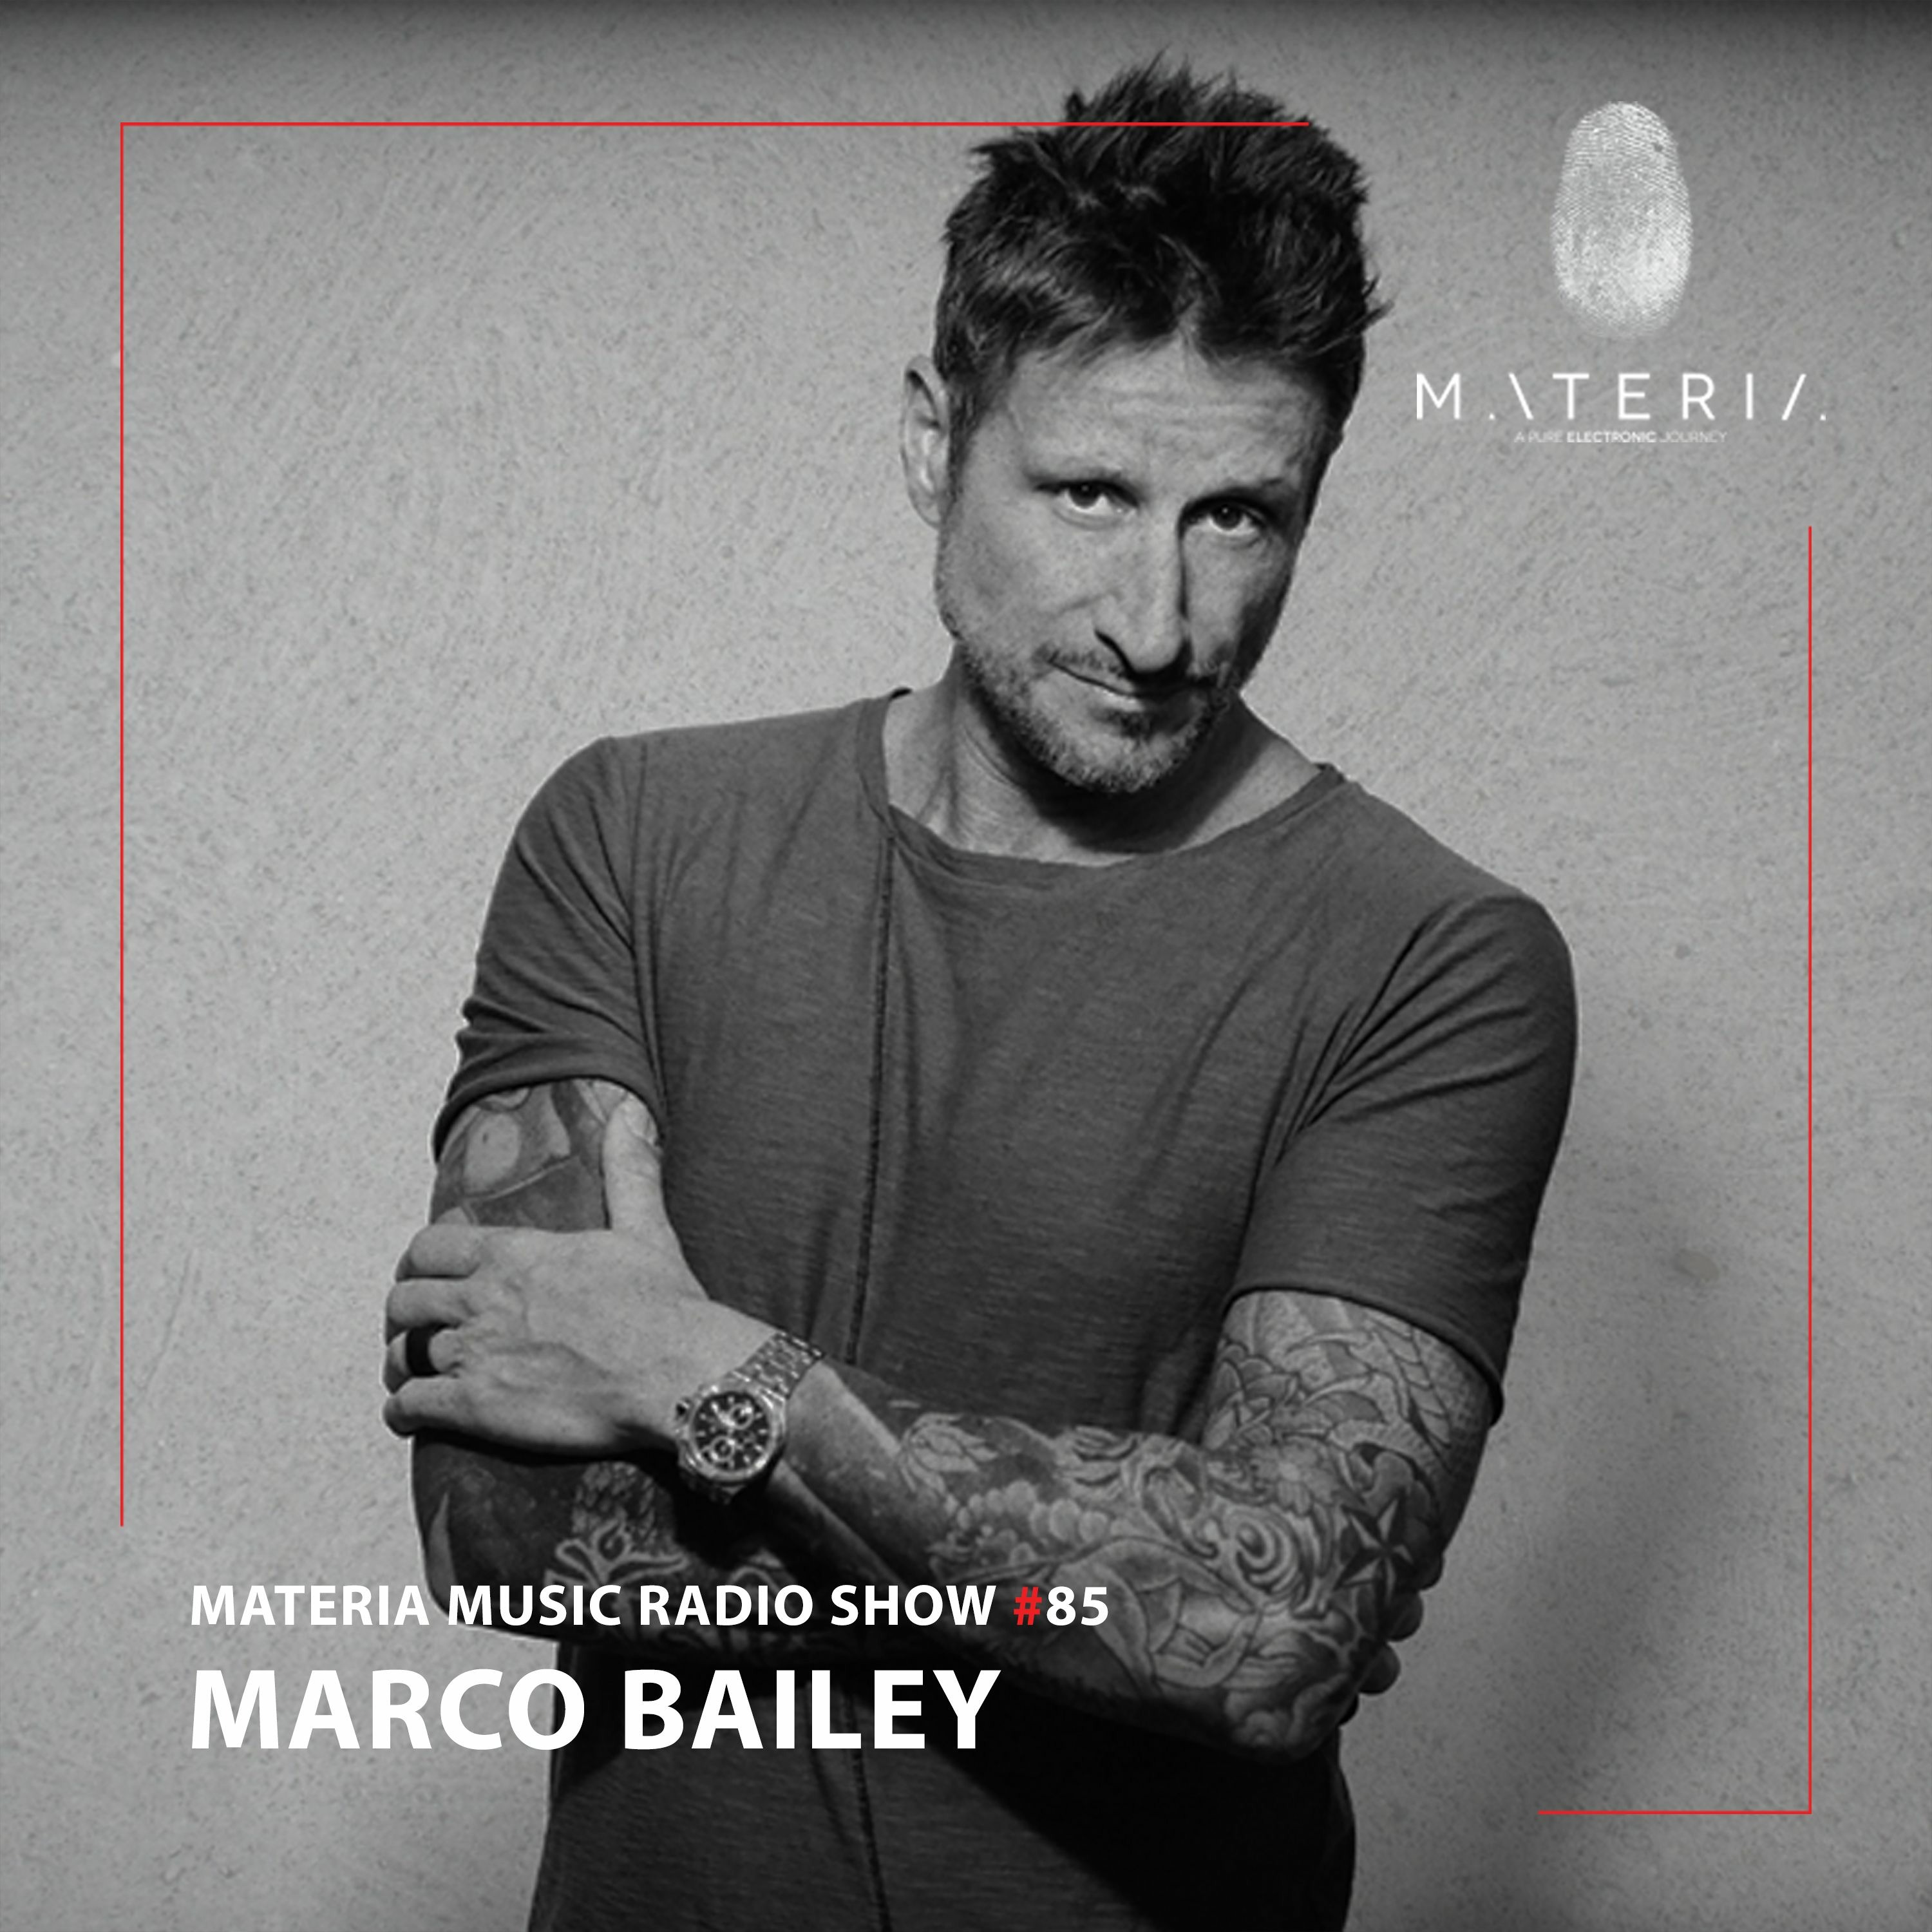 MATERIA Music Radio Show 085 with Marco Bailey